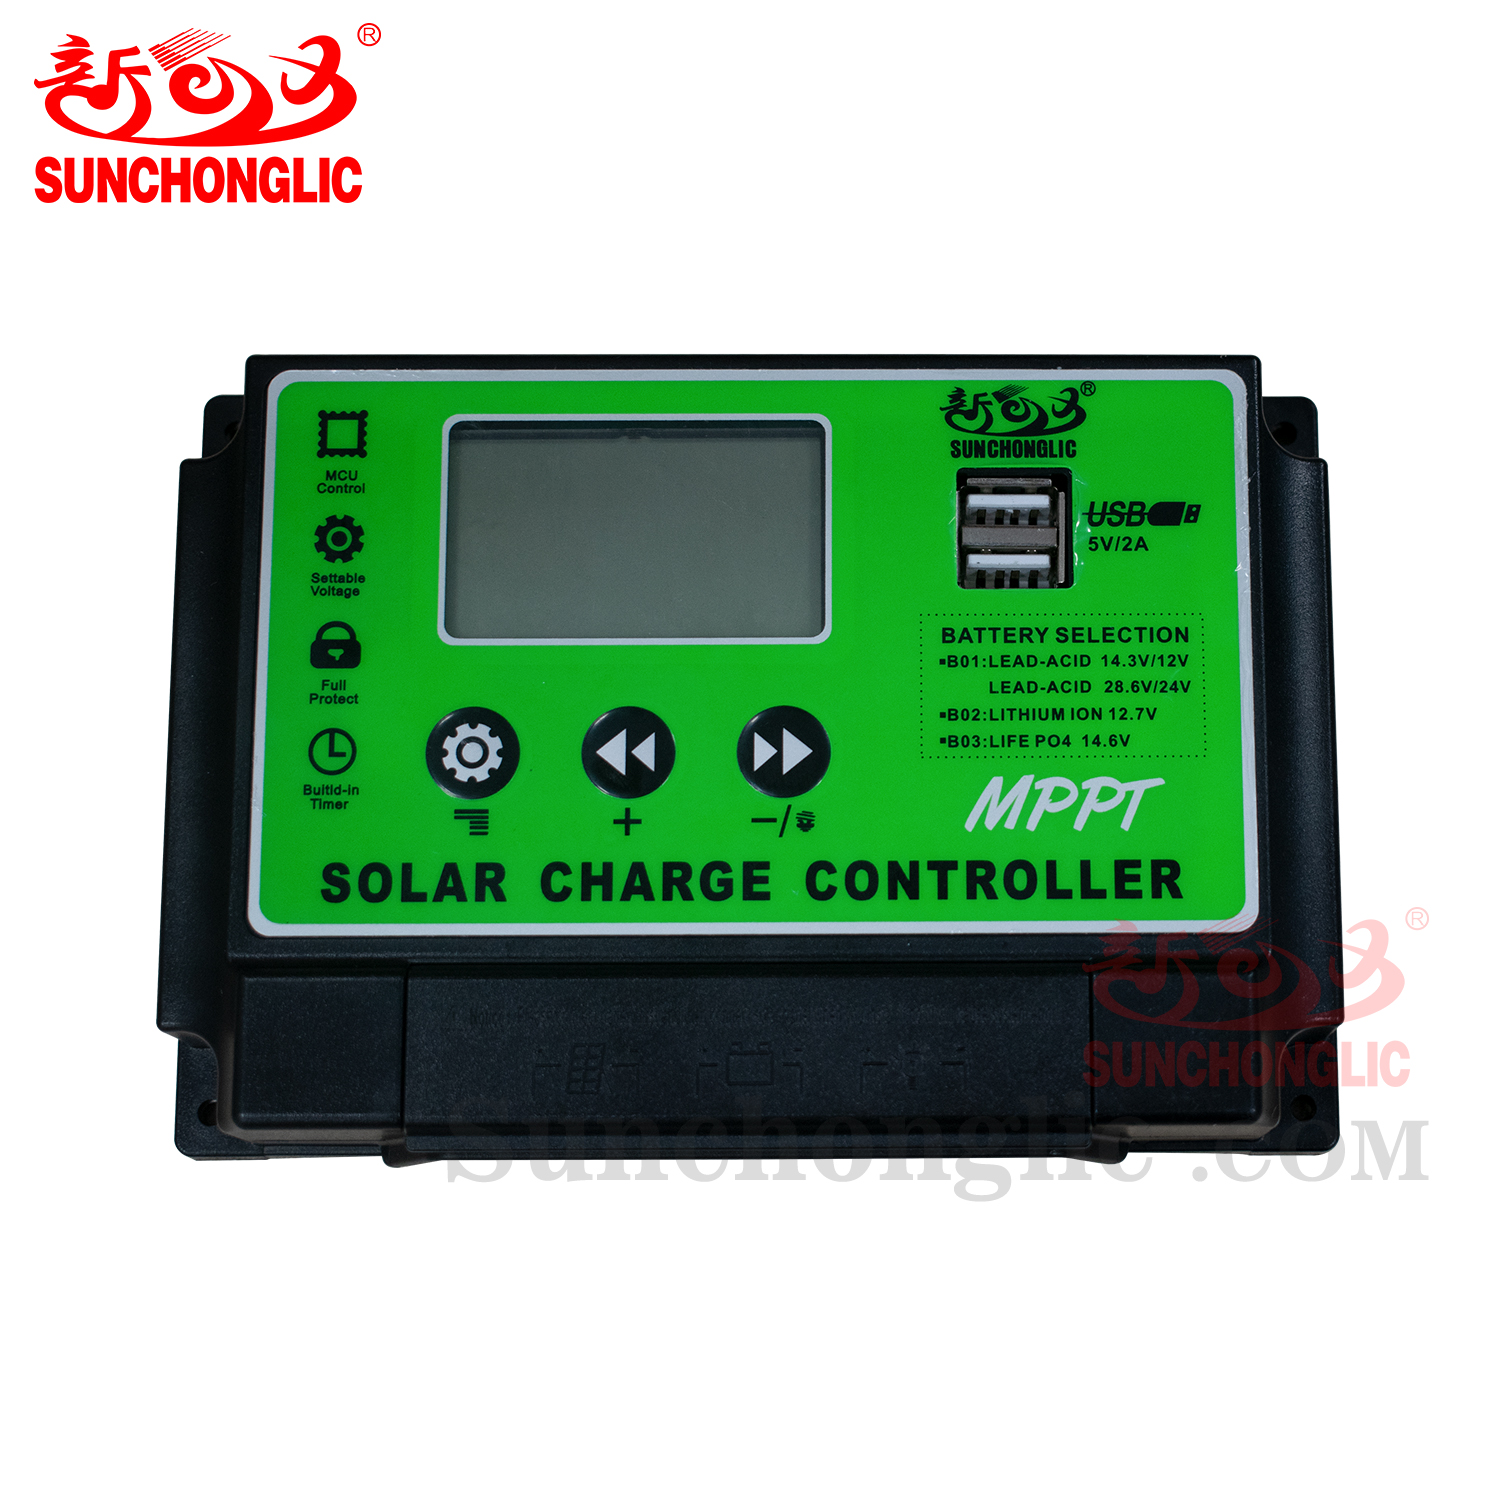 Solar Charge Controller - FT-MP1240